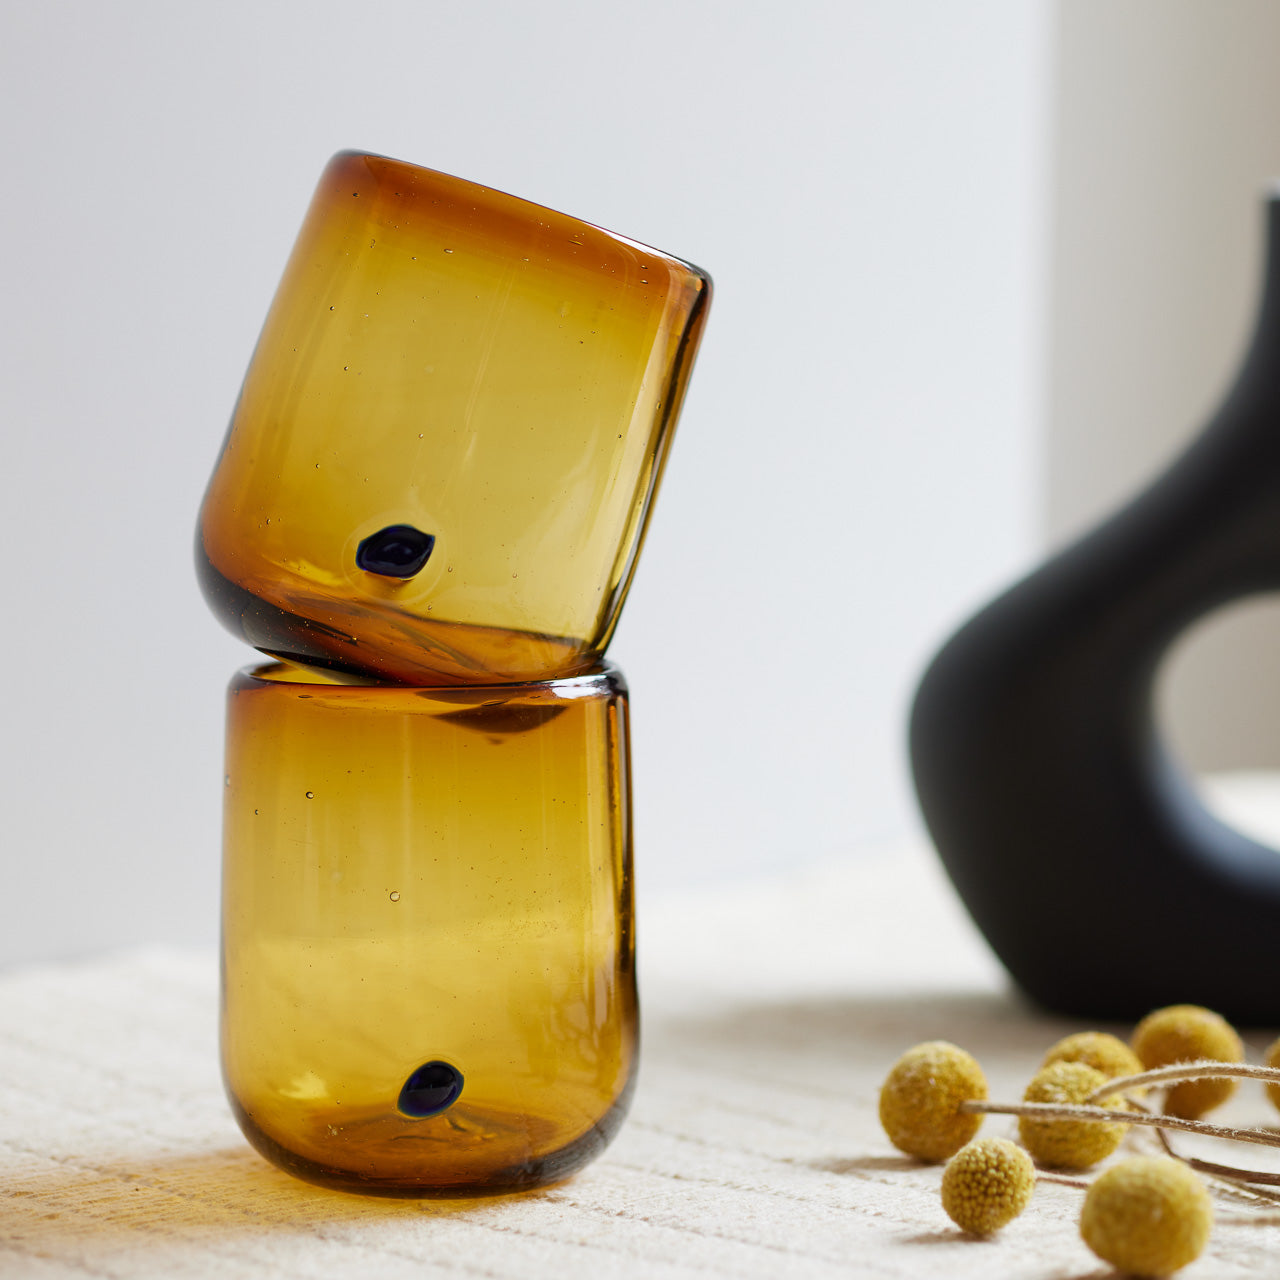 A pair of stacked amber and azul handblown glasses.